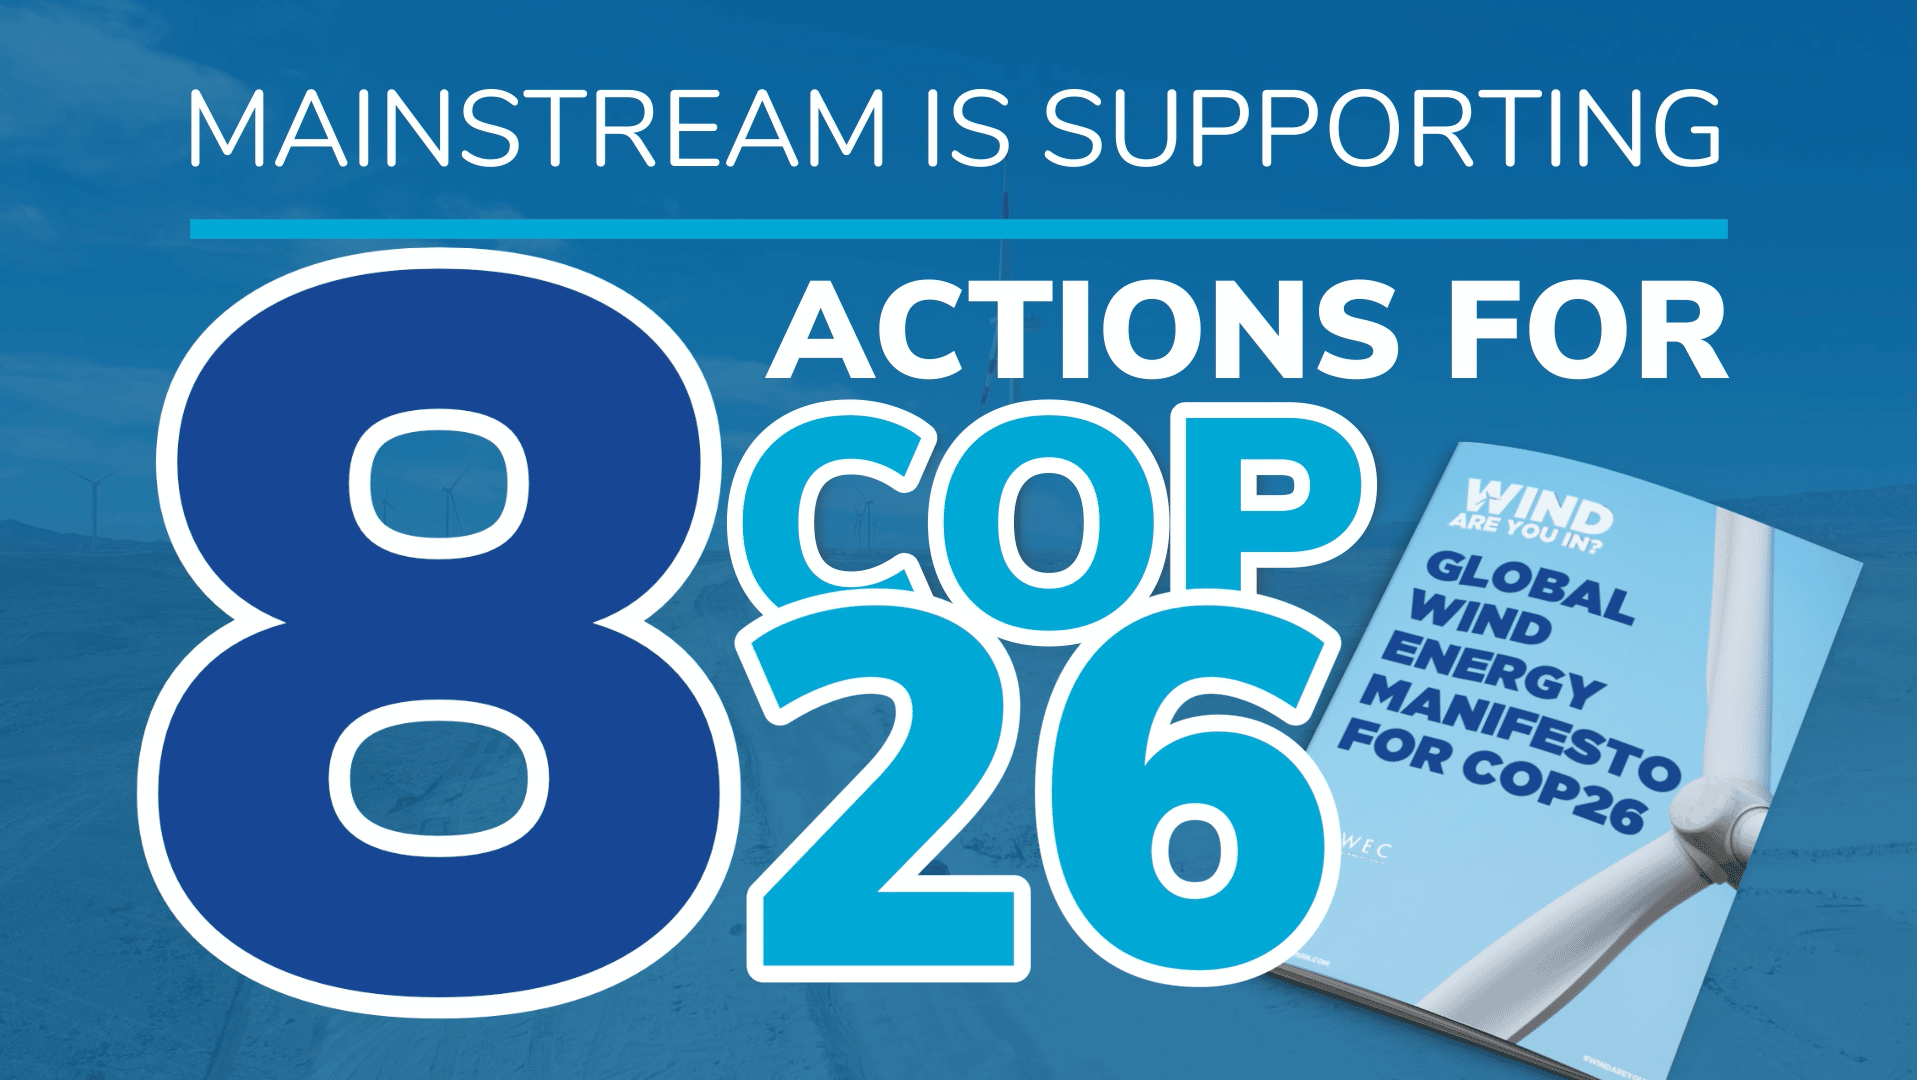 '8 actions for COP26' video thumbnail